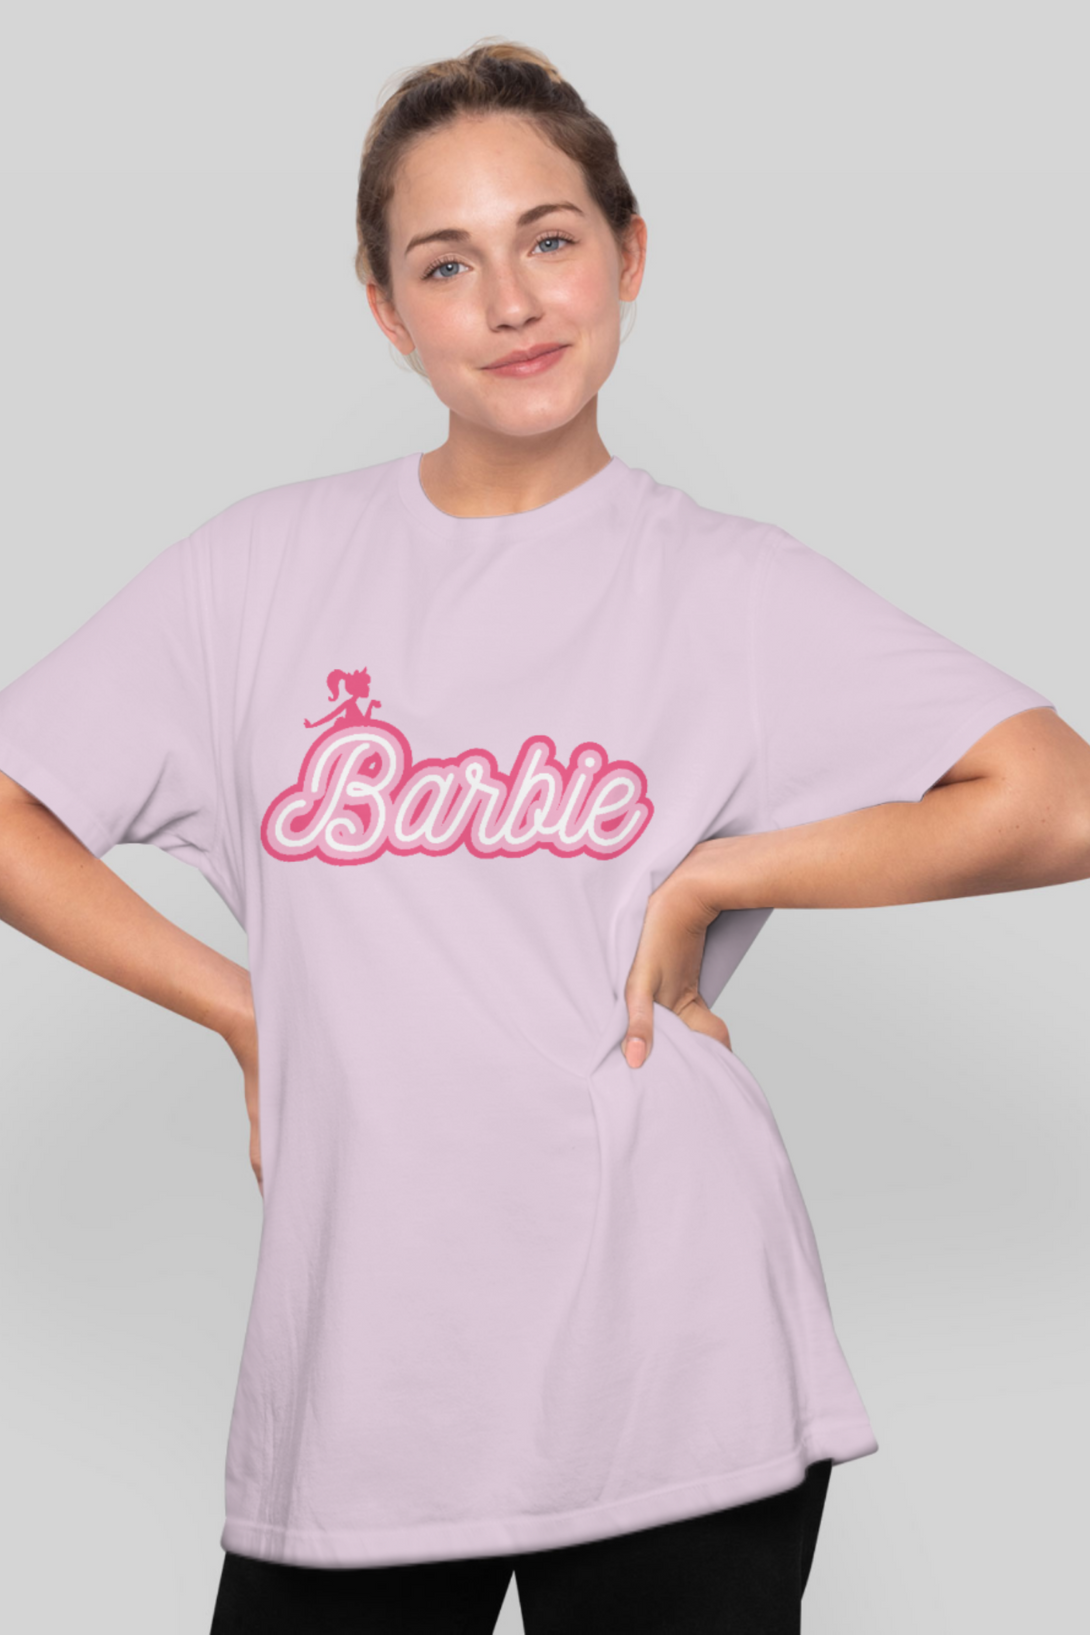 Buy Now Barbie Printed Oversized T-shirt for women Rs 578 at WowWaves Light Pink / XS